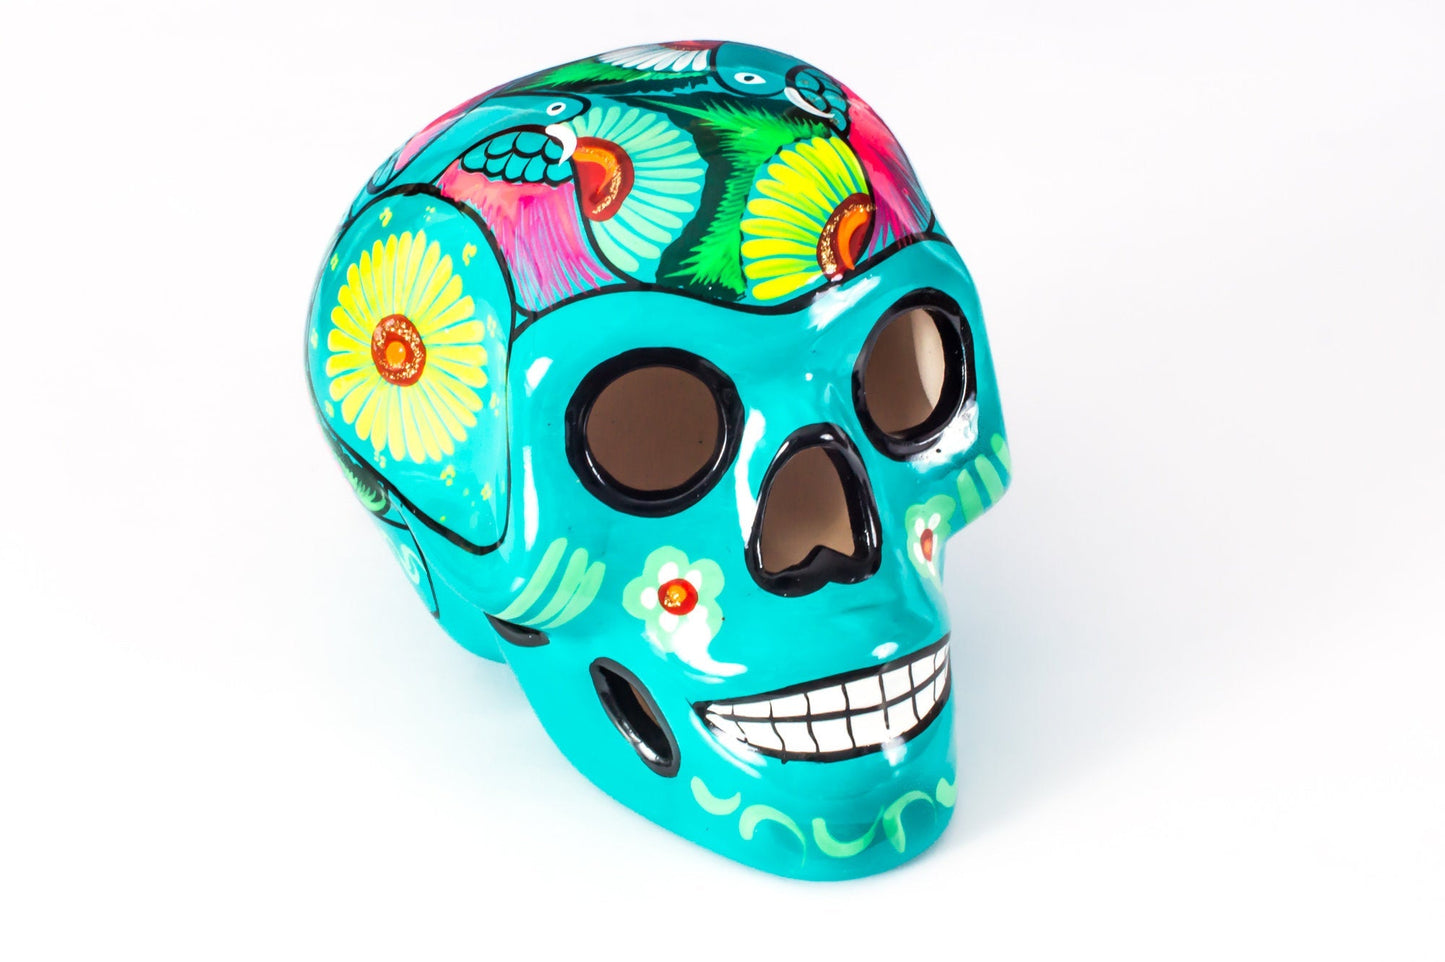 Large Ceramic Skulls Wholesale x 6 | Hand-painted With Love In Mexico By Traditional Huichol Artist - ARTMEXICO